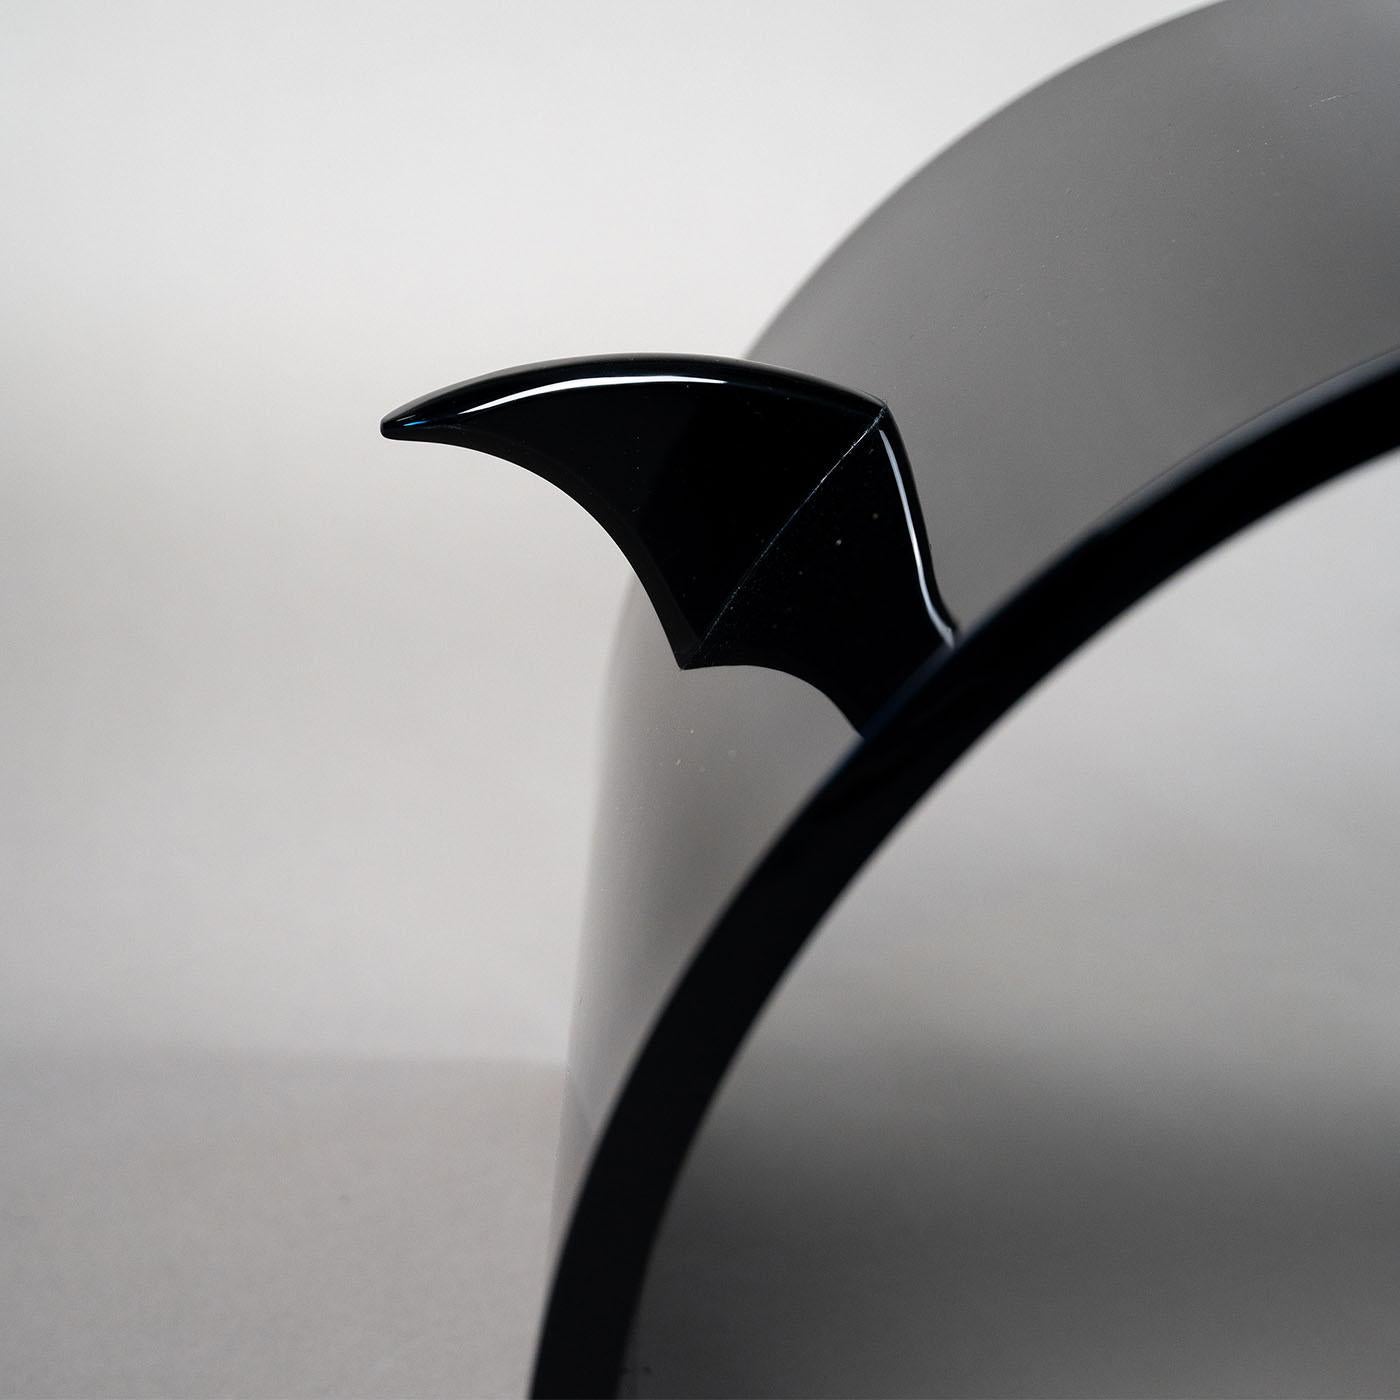 Clean lines arranged in a sculptural ensemble lend this handmade black PMMA chair its unmistakable contemporary feel. Distinguished by a pair of shark fin-like elements protruding from the back to convey a sense of audacity and bravery, the chair's